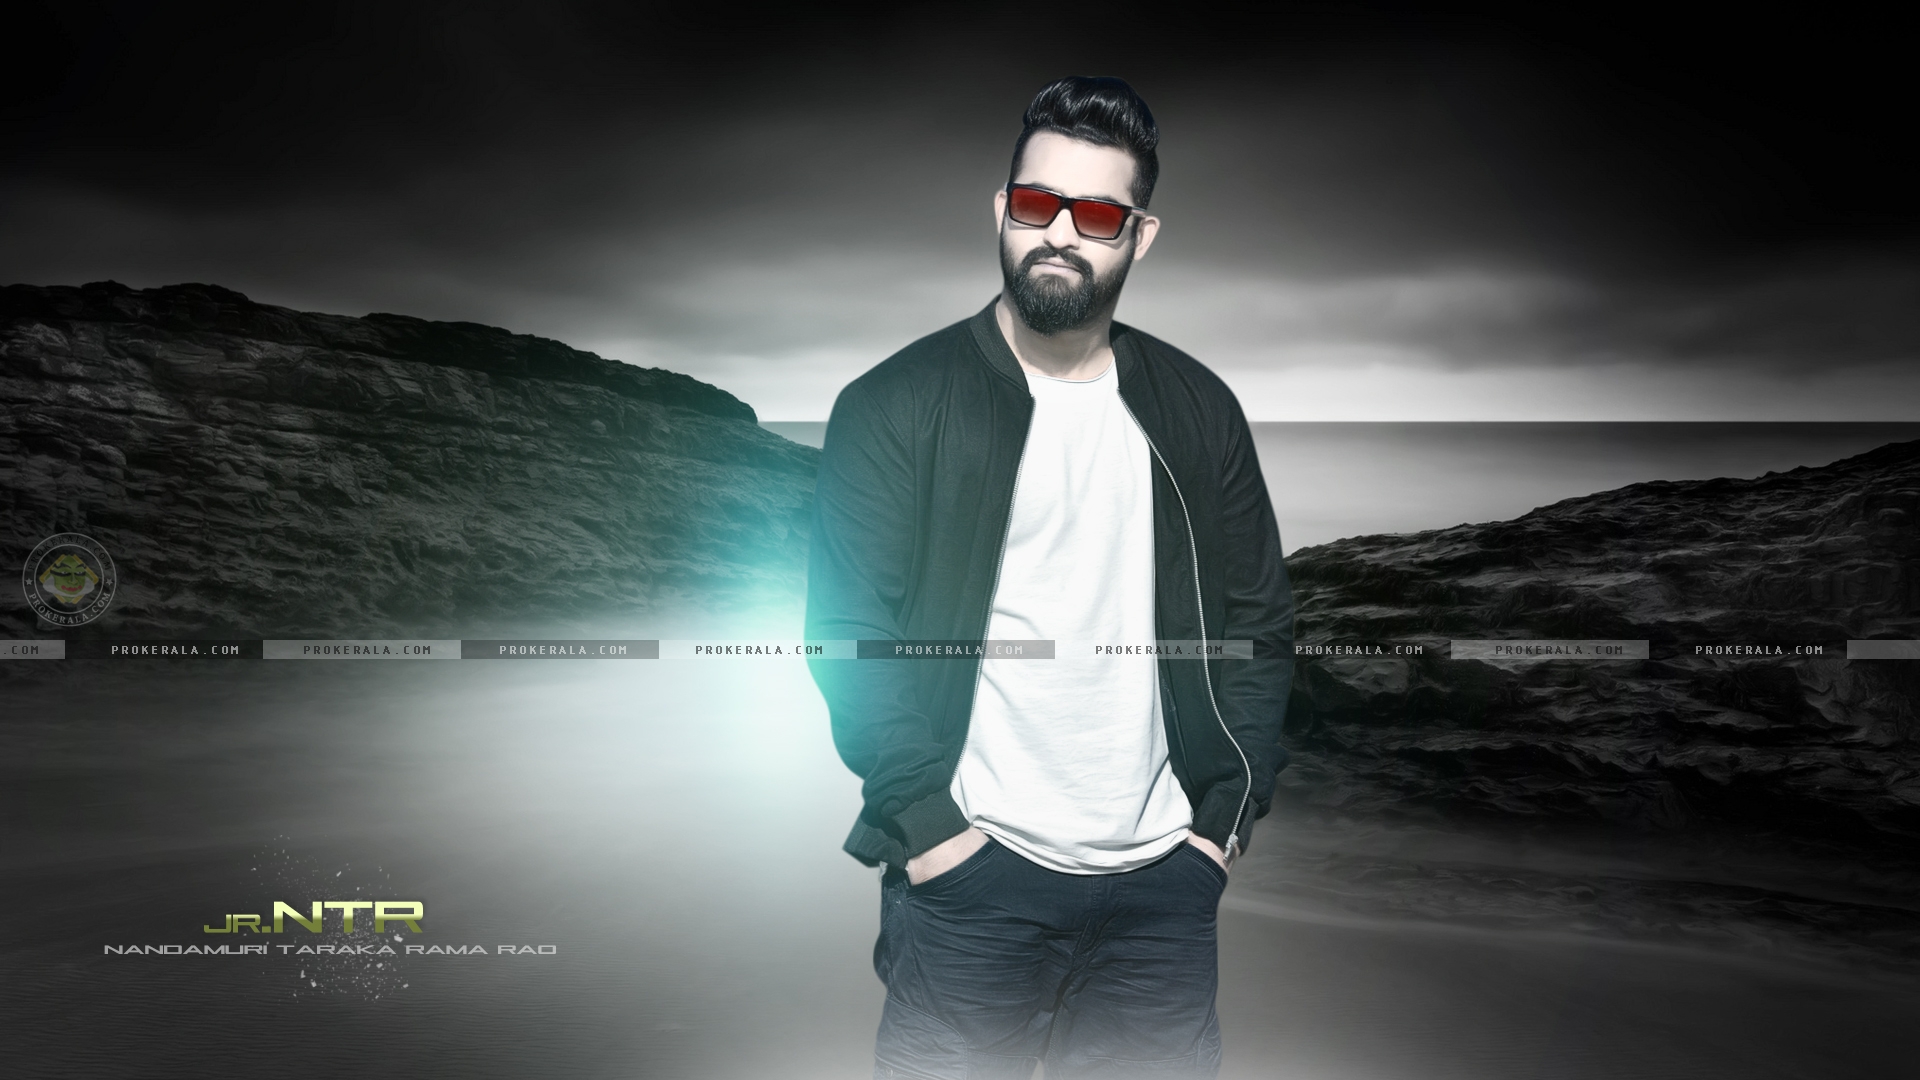 Jr NTR Photos HD Latest Images Pictures Stills of Jr NTR  FilmiBeat